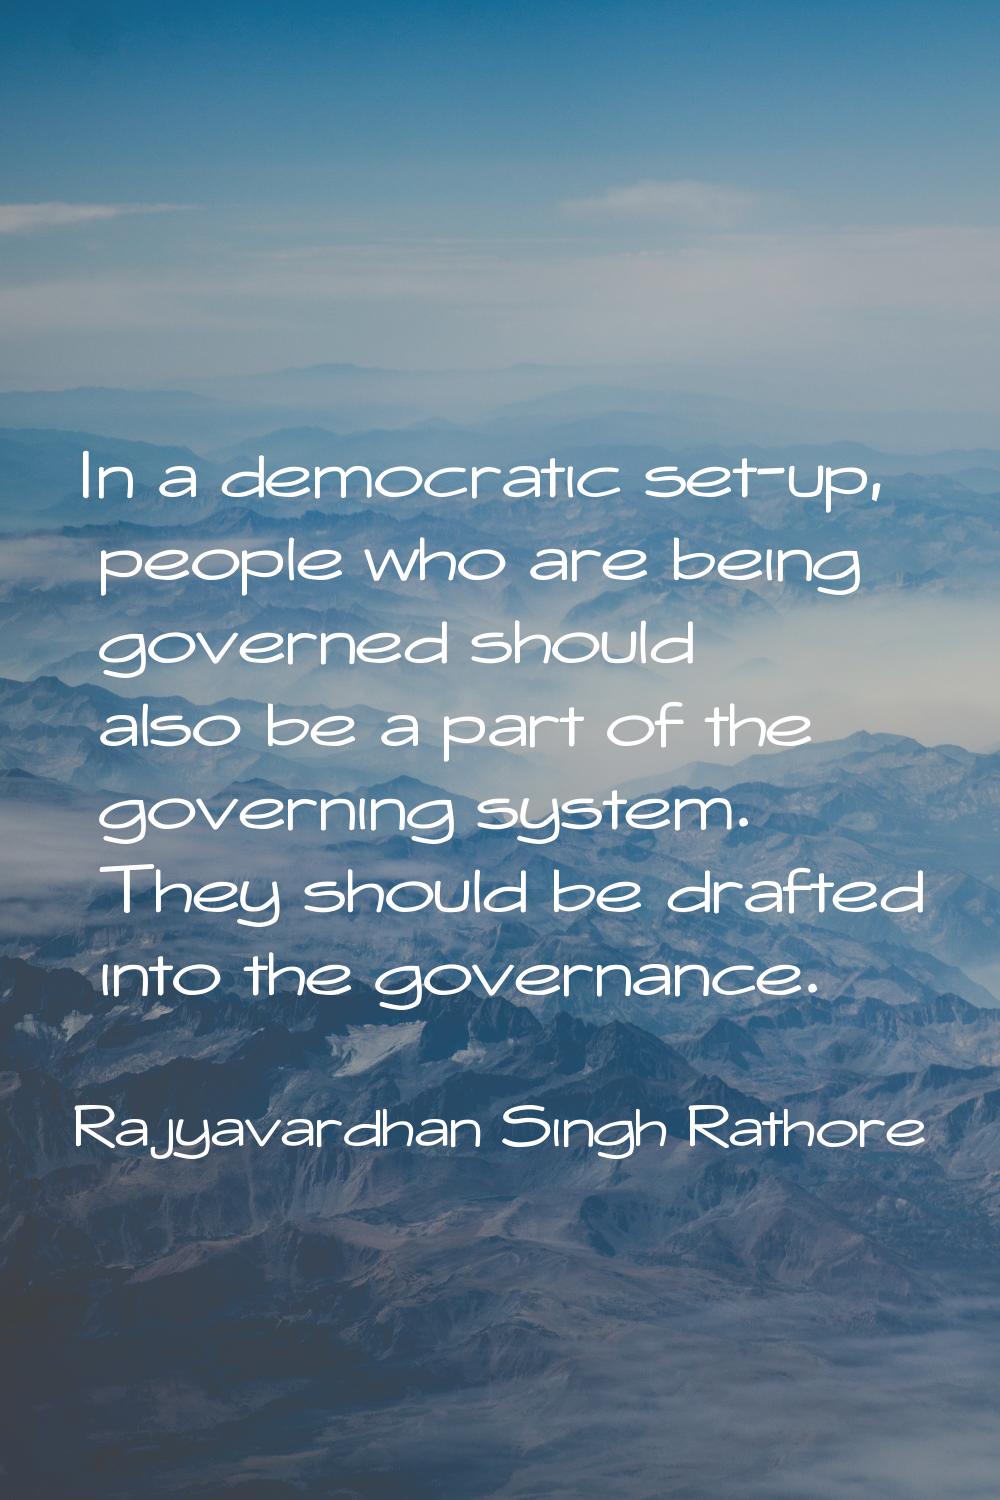 In a democratic set-up, people who are being governed should also be a part of the governing system